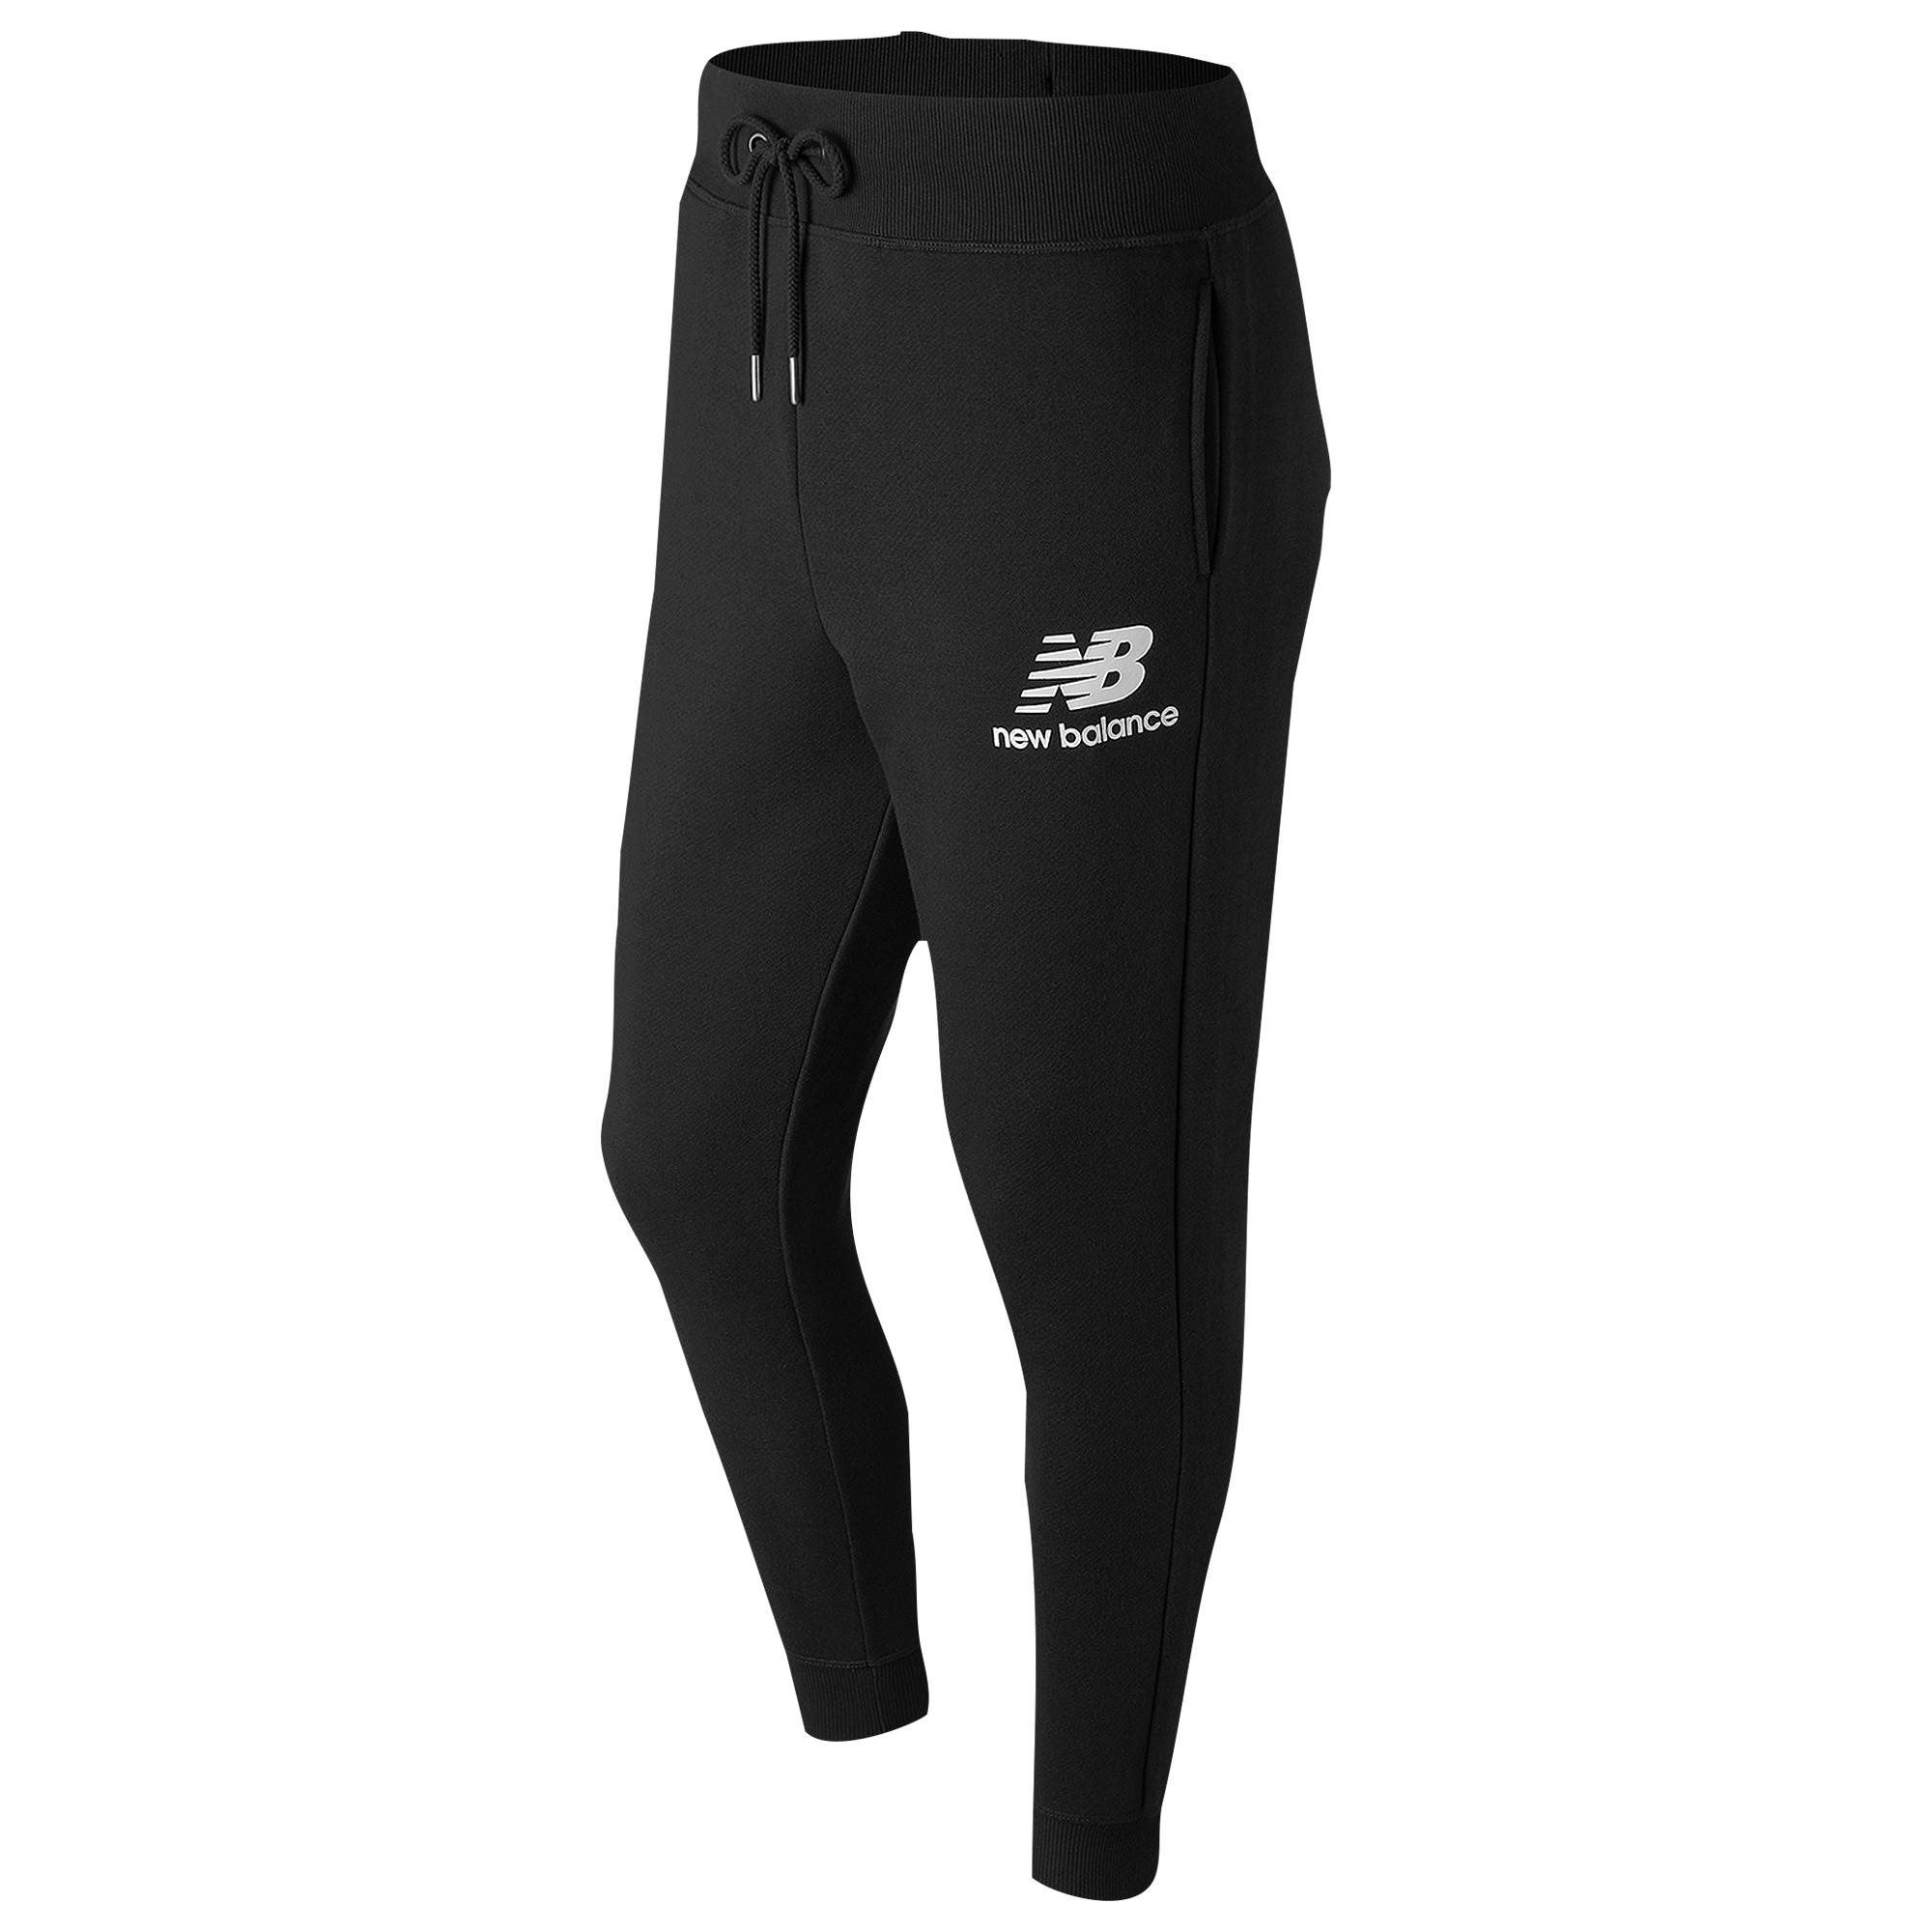 New Balance Essentials Brushed Sweatpants in Black for Men - Lyst